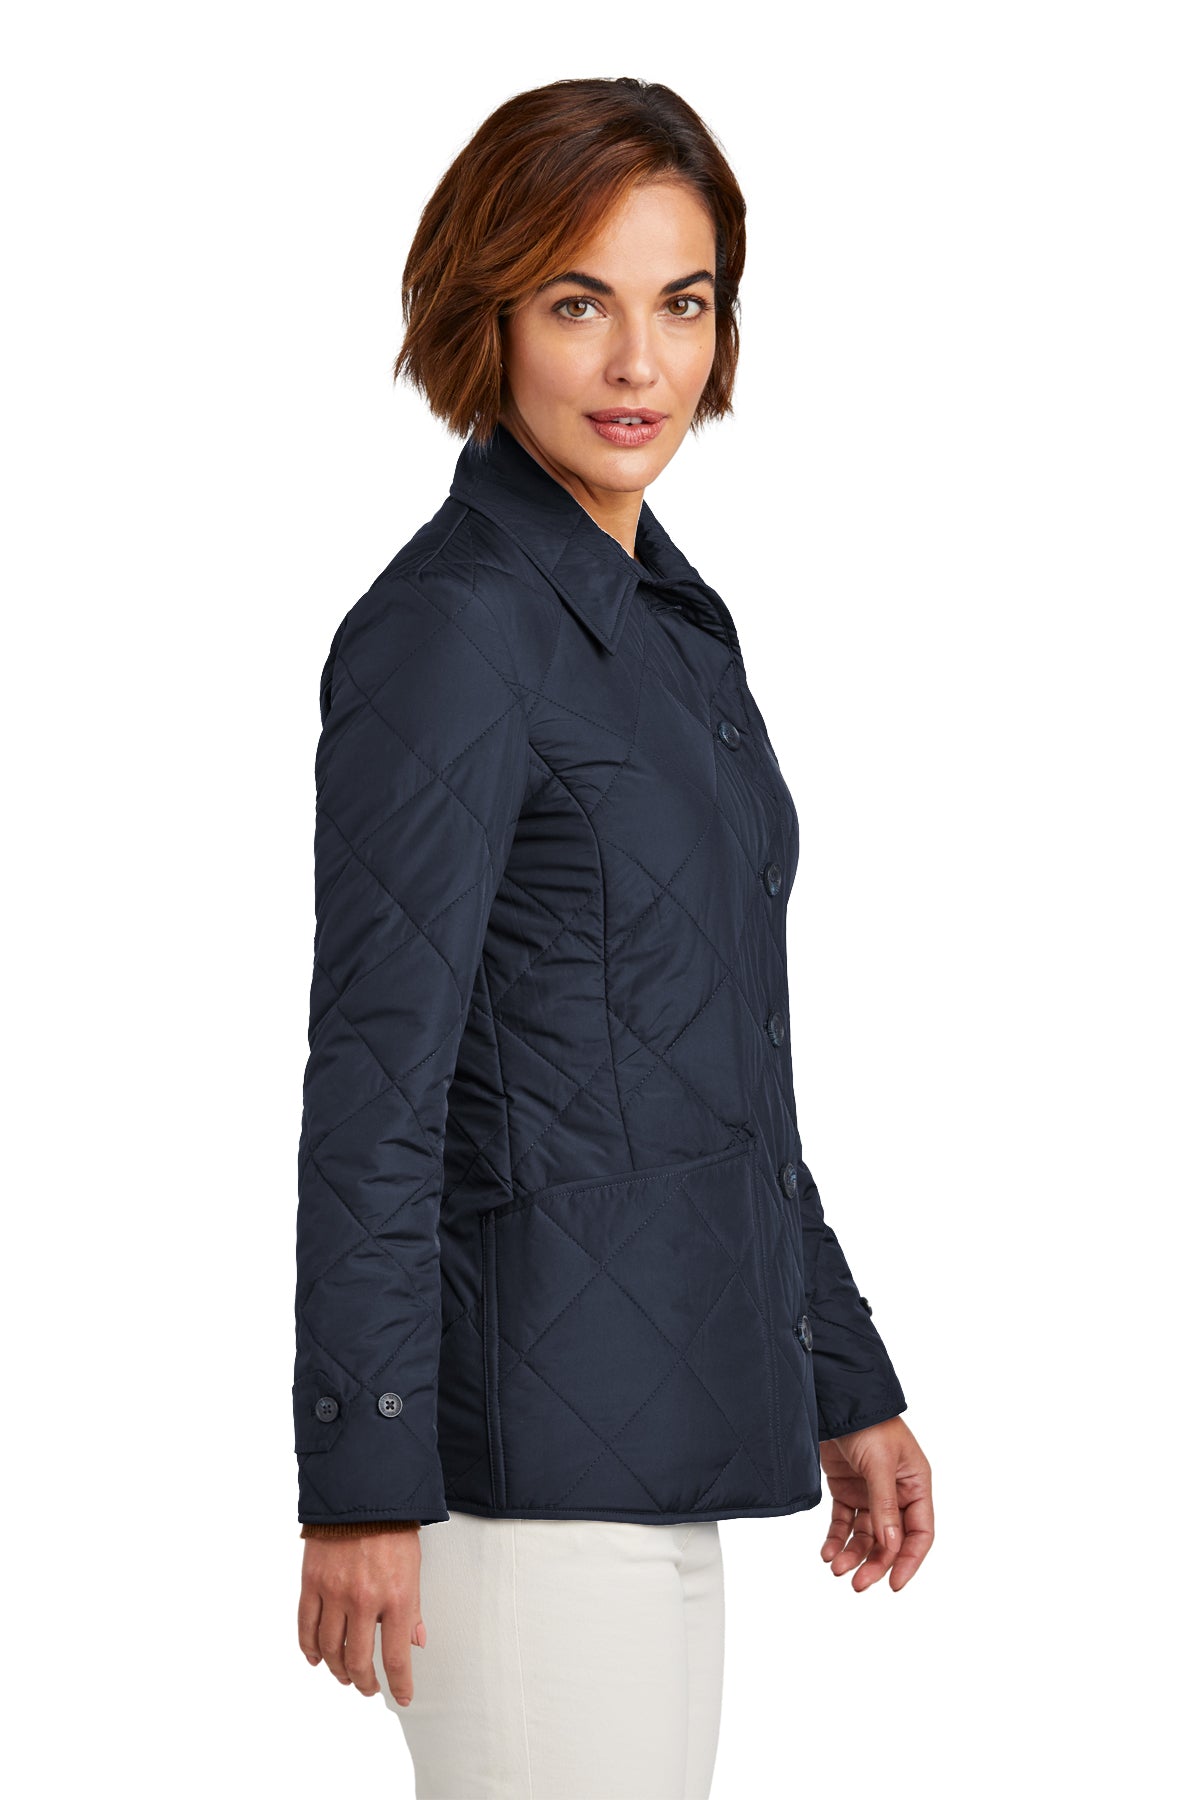 Brooks Brothers Womens Quilted Jacket, Night Navy